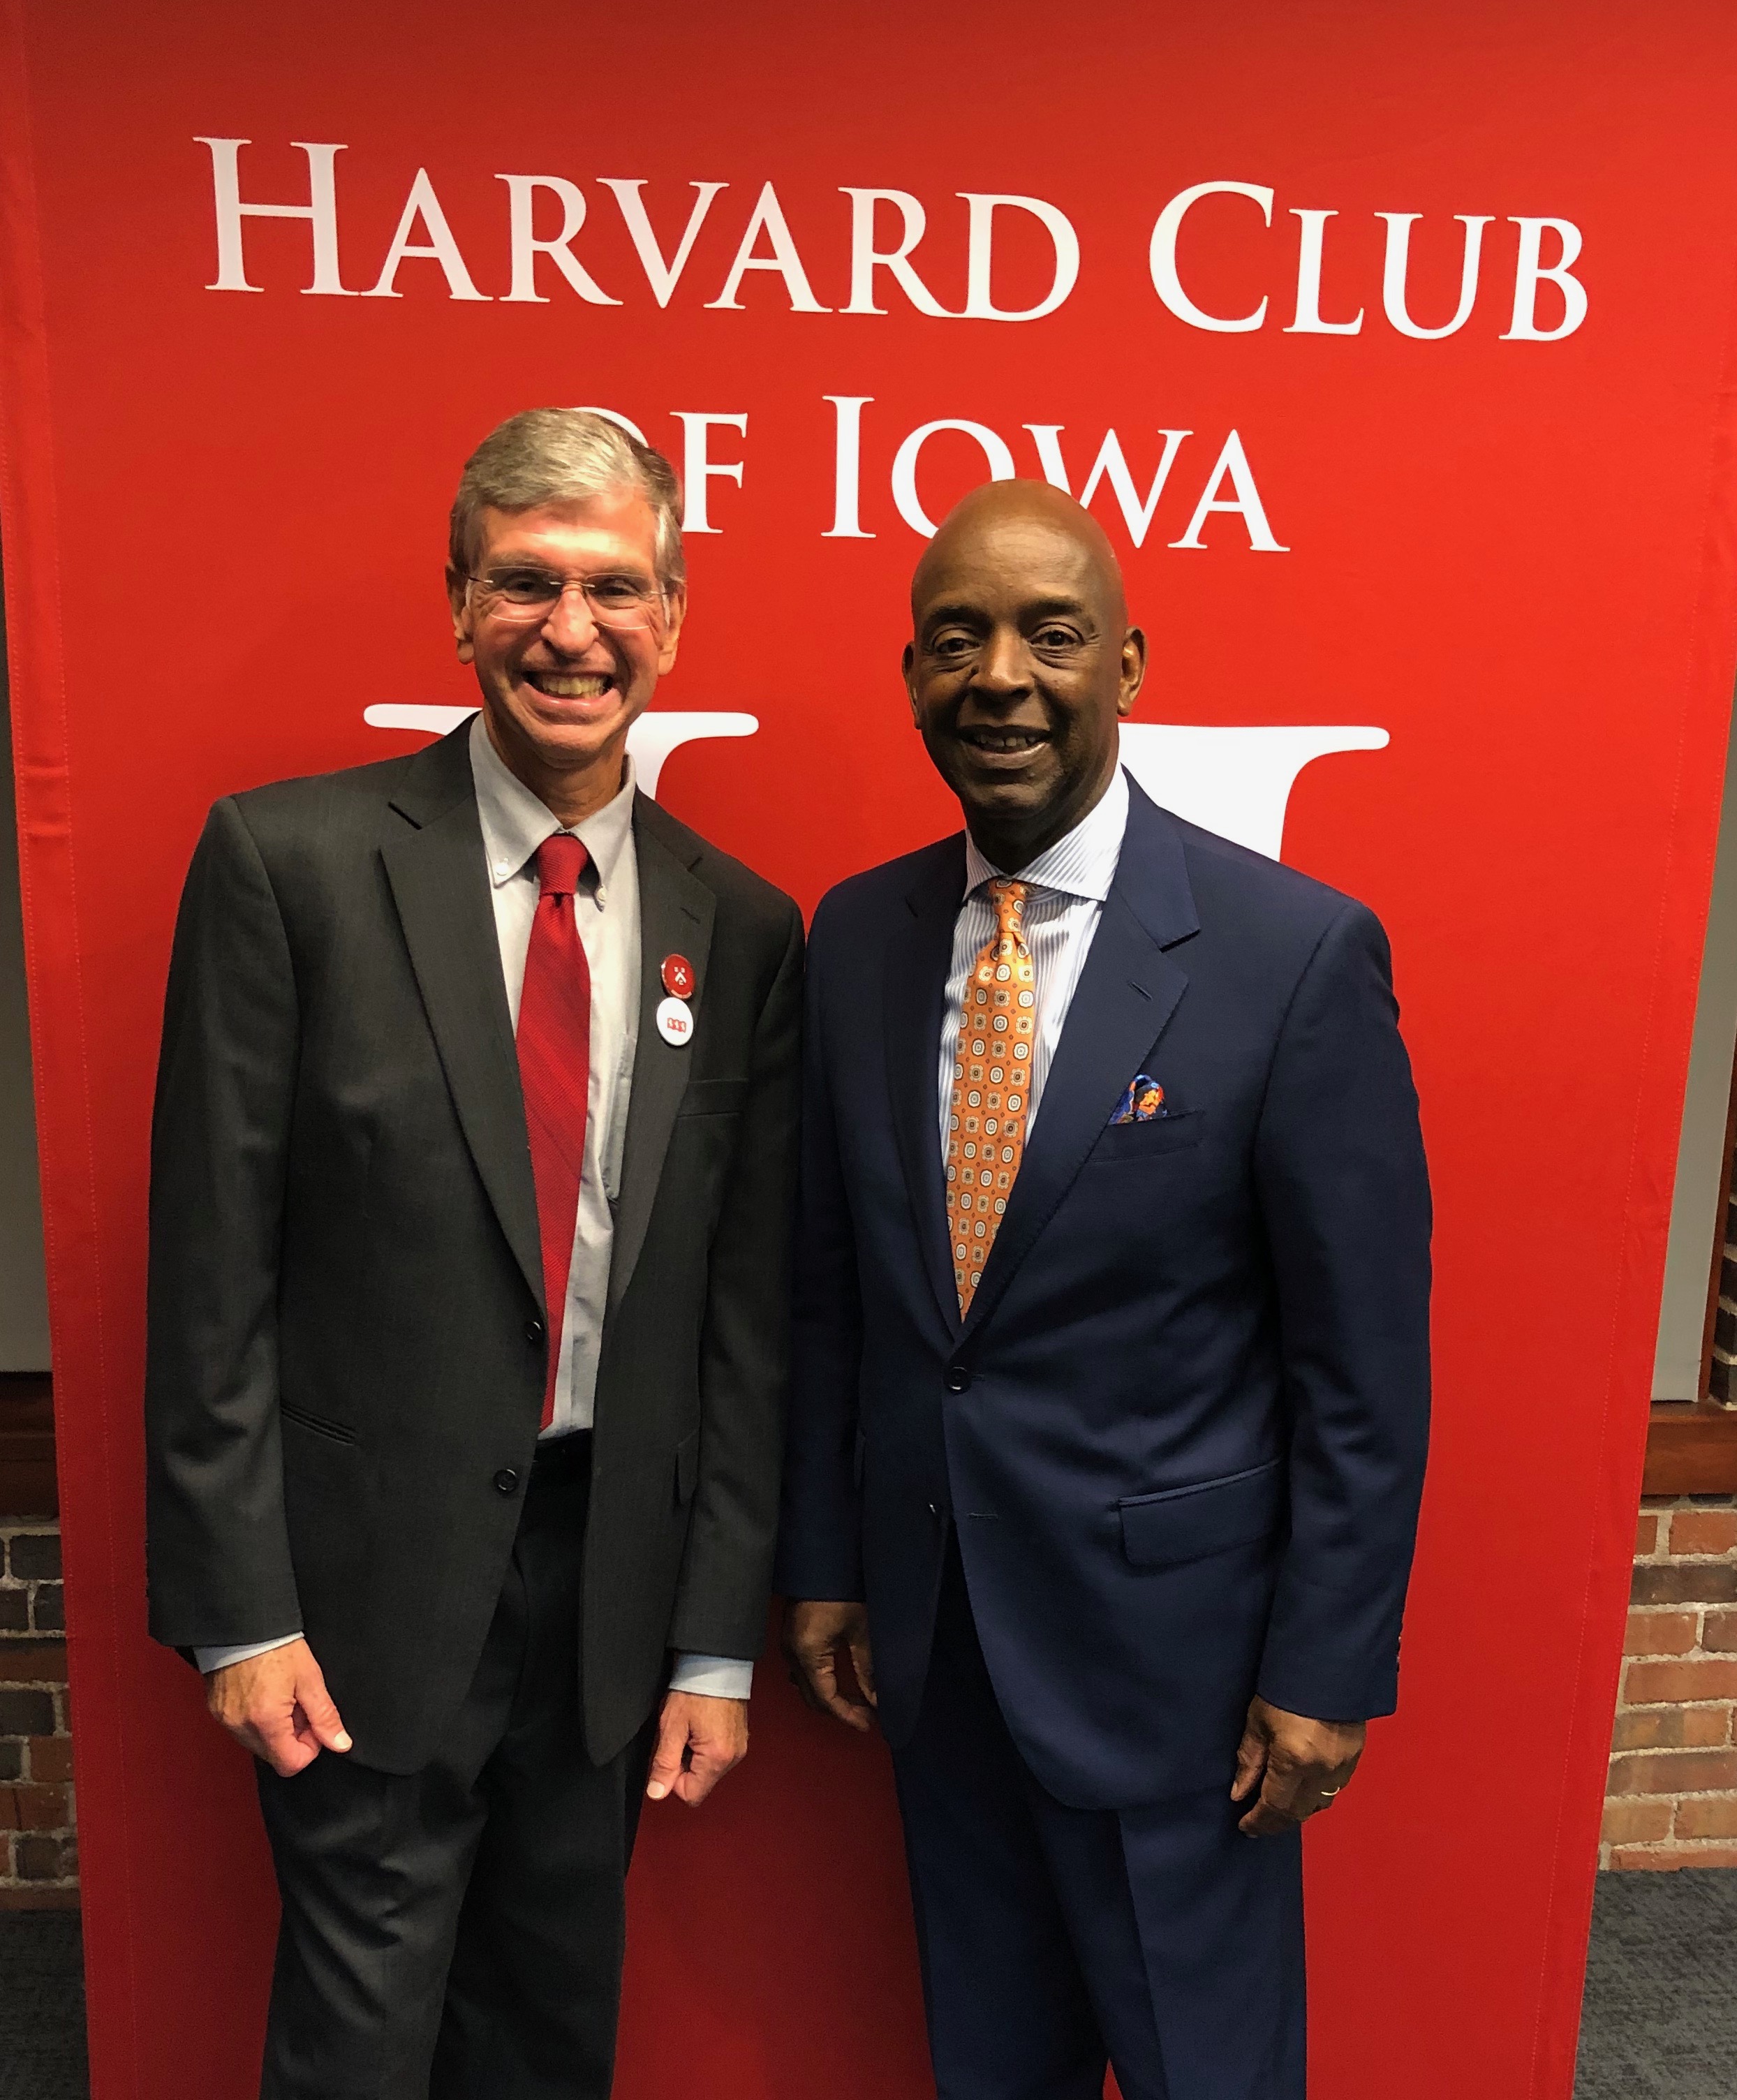 Matthew and Ronald in suits standing next to each other in front of a large red sign that reads Harvard Club of Iowa